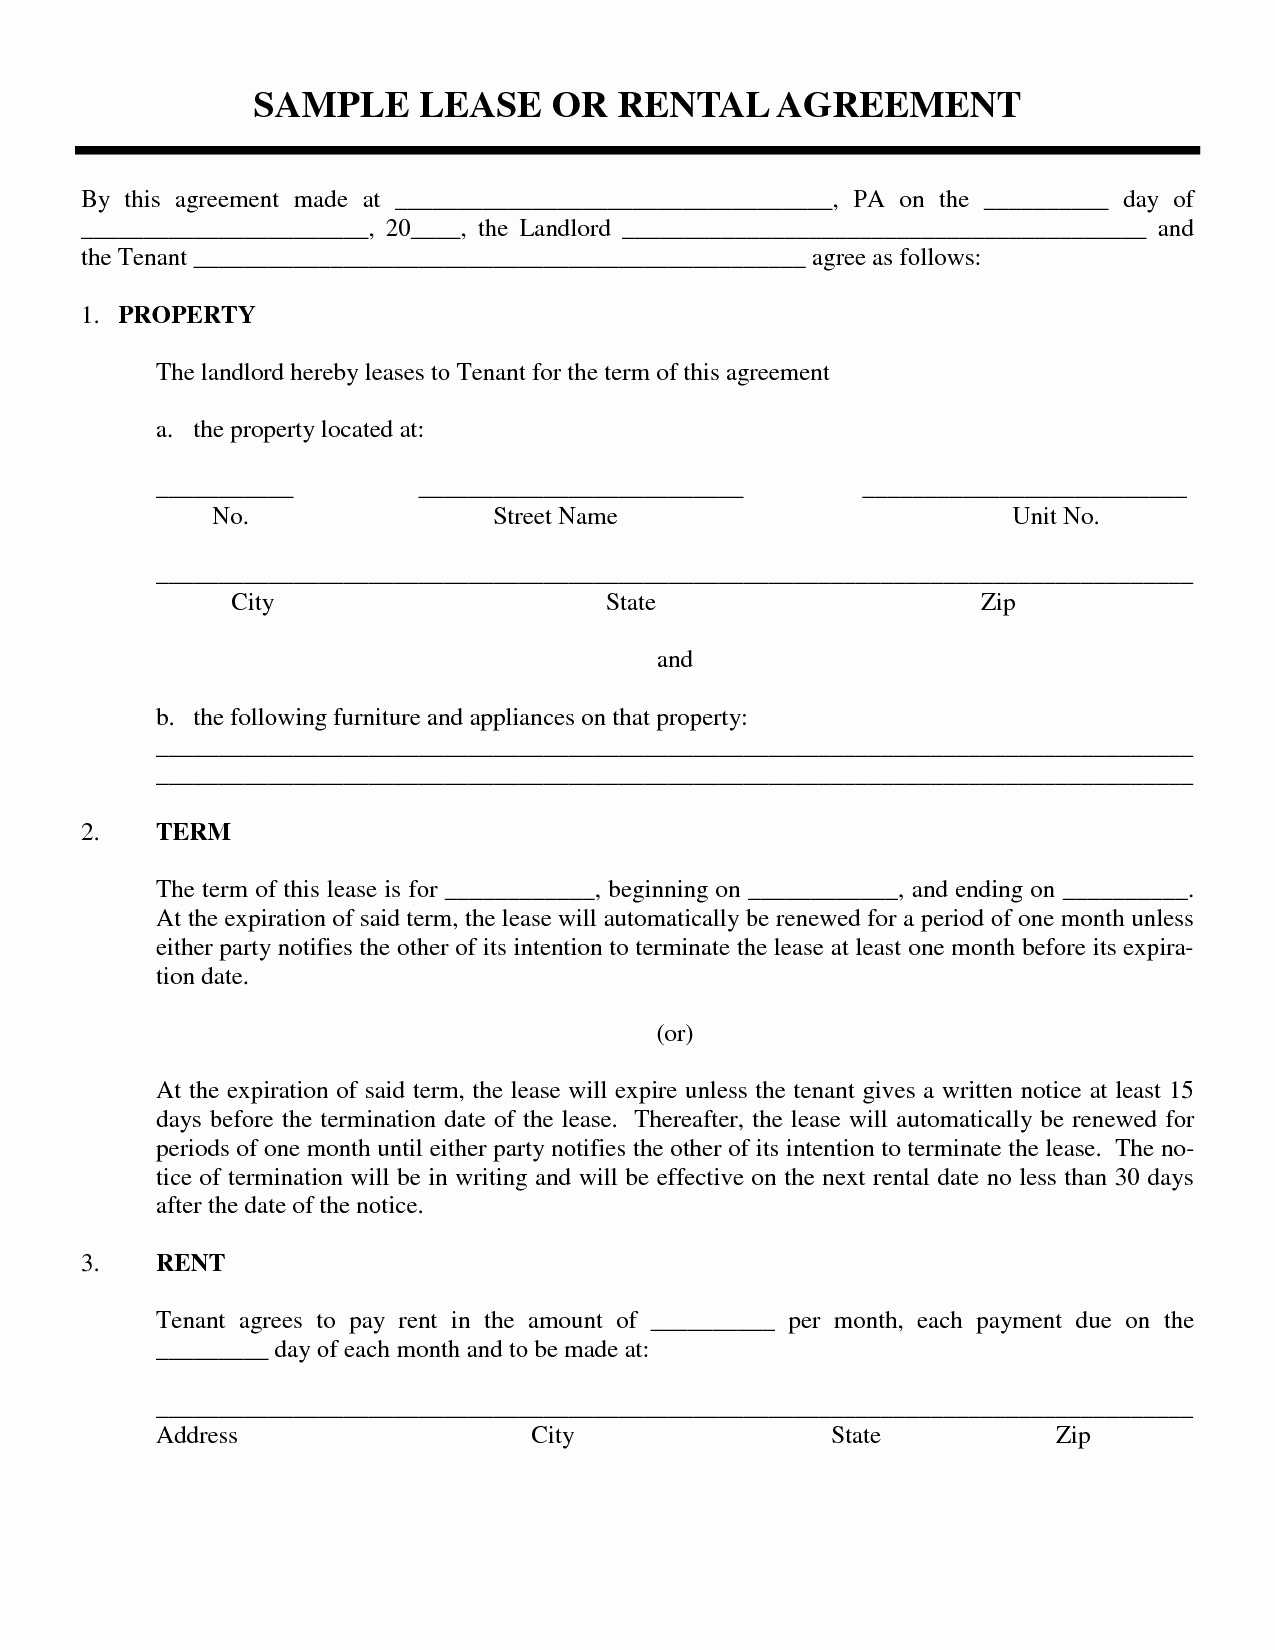 Simple Equipment Rental Agreement Template Free Awesome Sample Lease or Rental Agreement